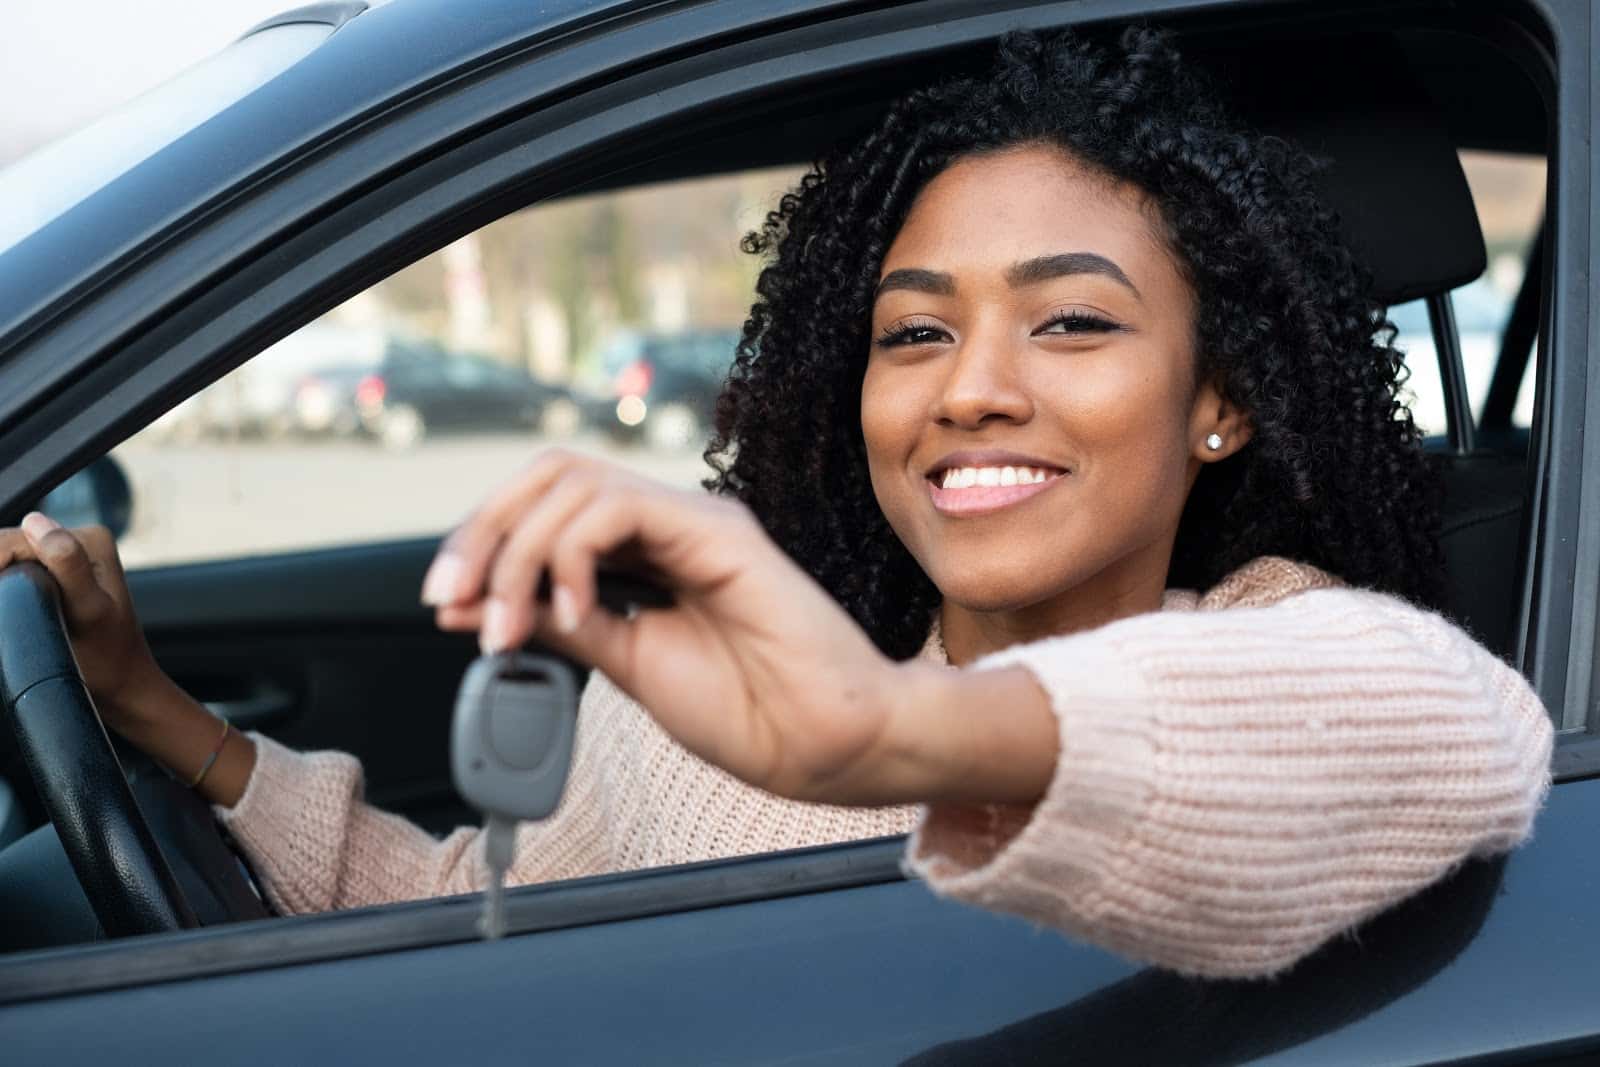 Smiling woman holds keys while sitting in driver's seat